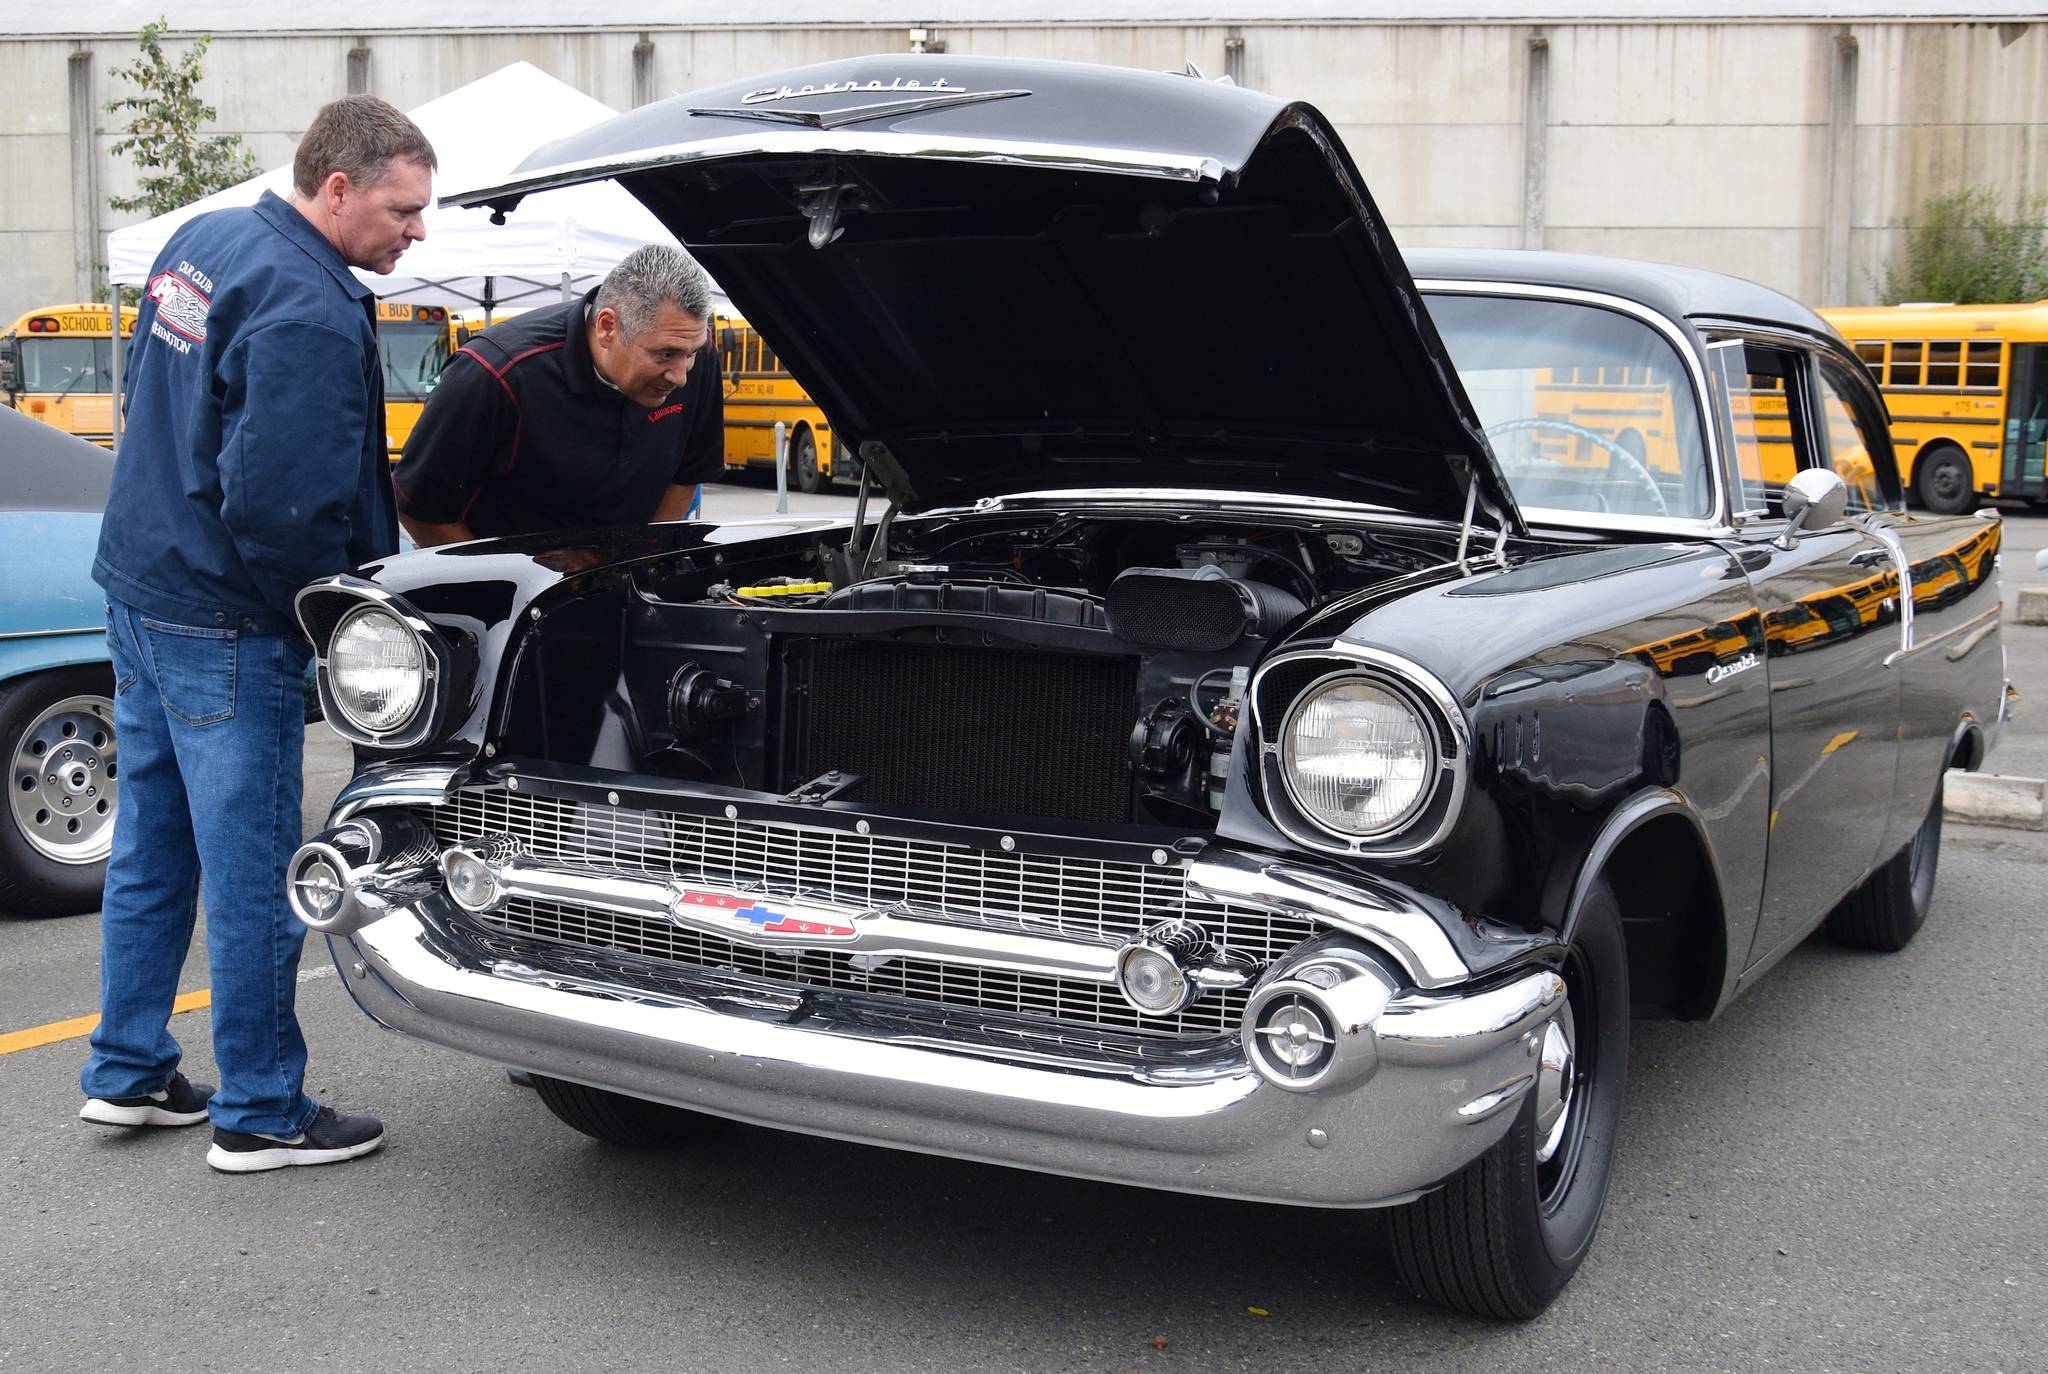 Rich Cerrillo and Chris Ralph inspect a classic 1957 Chevrolet during the Hot Rod Garage Car, Truck and Motorcycle Show on Saturday. RACHEL CIAMPI, Auburn Reporter